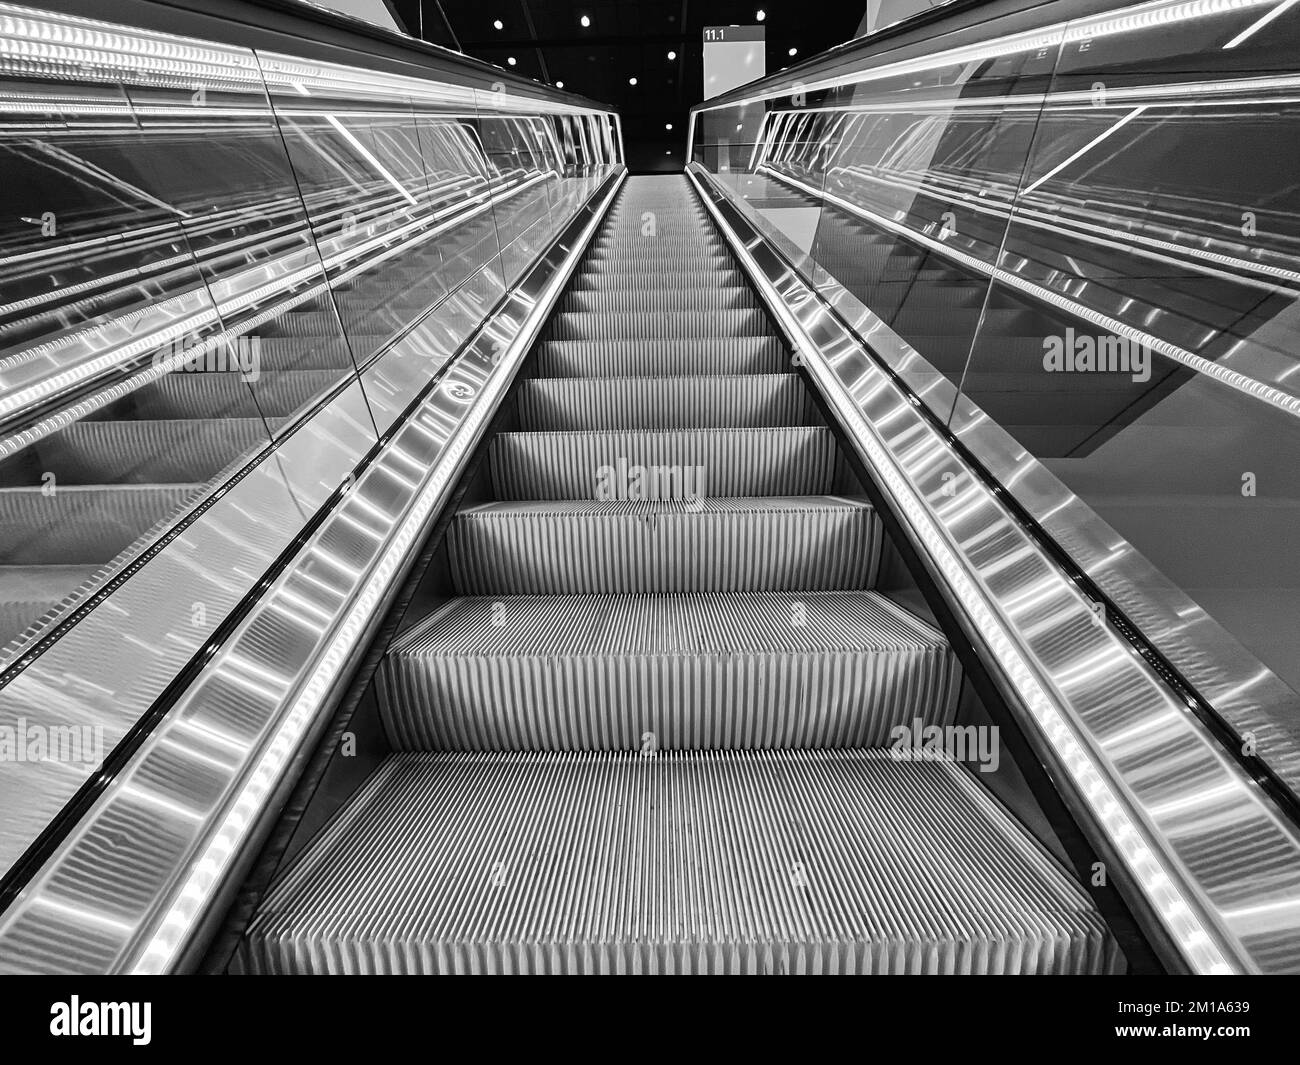 Moving up in a escalator with glass sides in a modern building Stock Photo